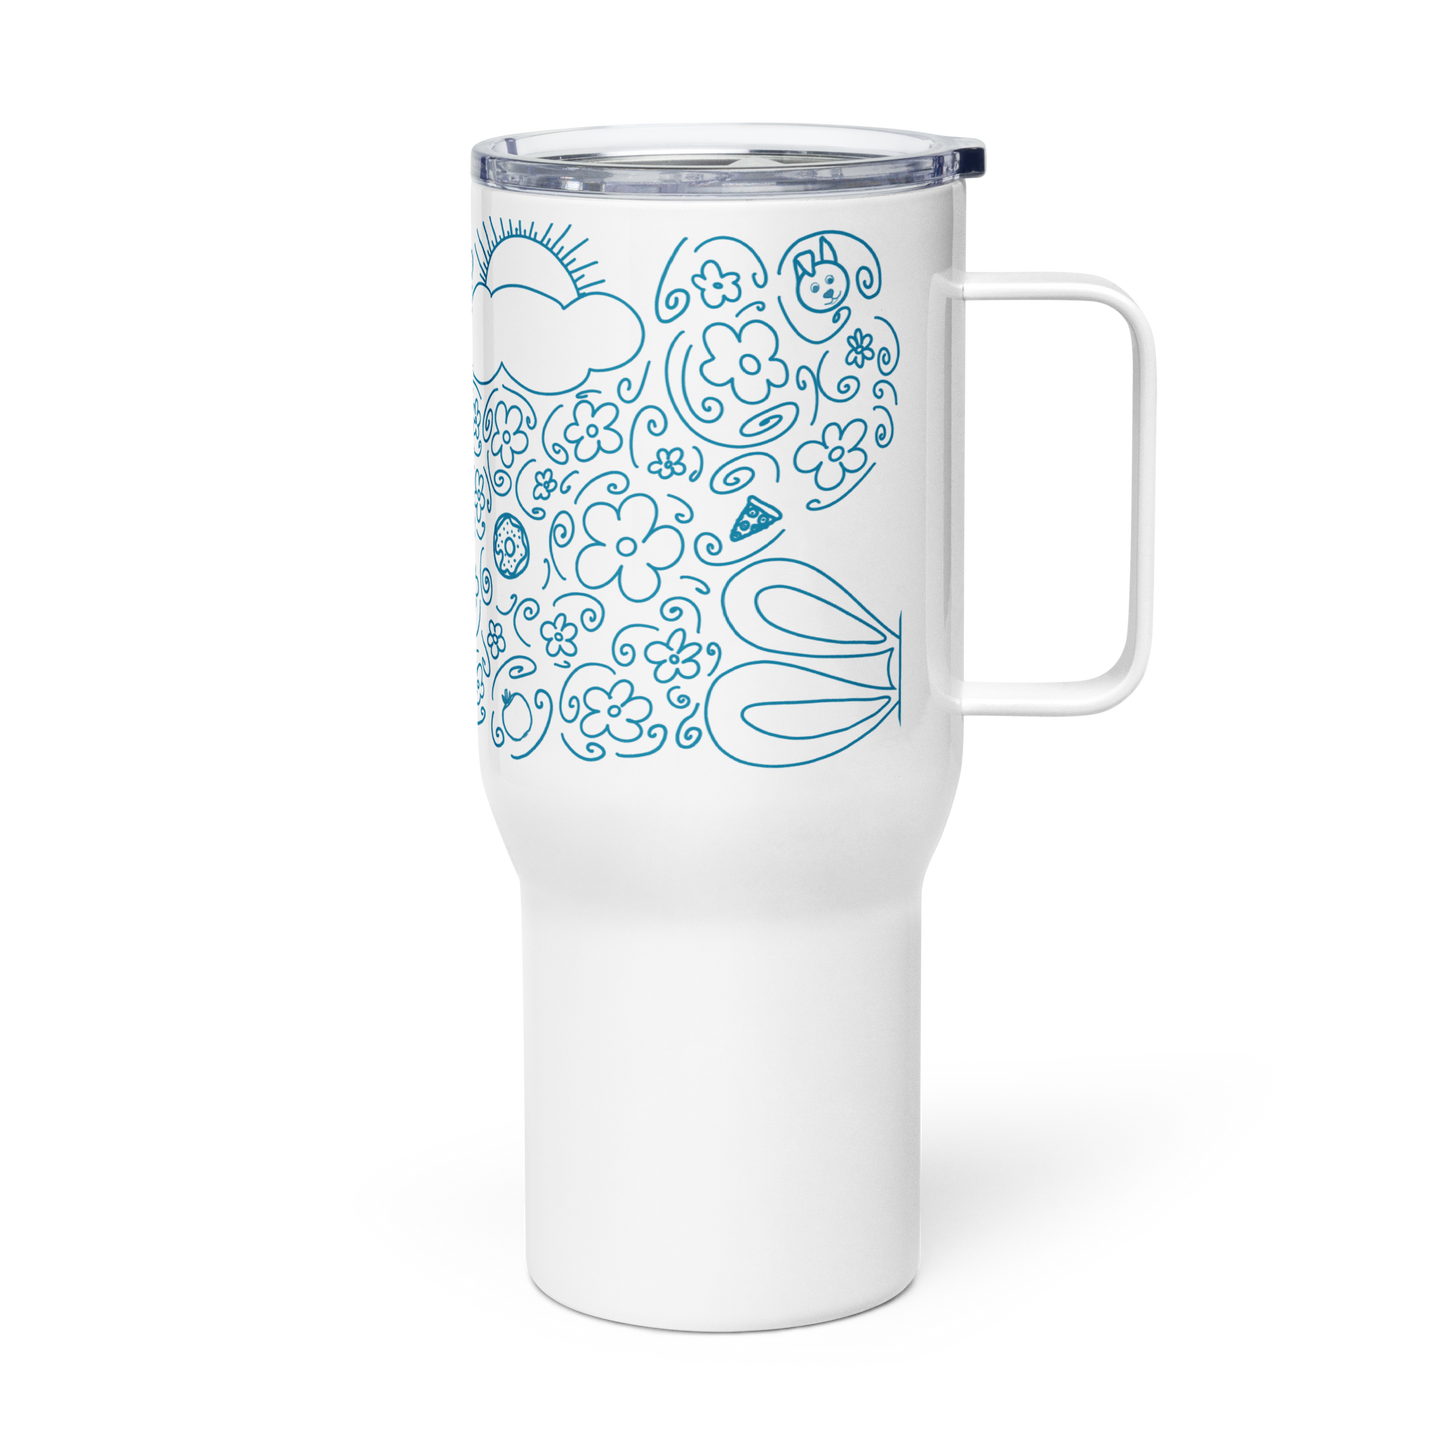 Find Your Happy Travel mug | Tumbler with a Handle | 25 oz | FREE SHIPPING